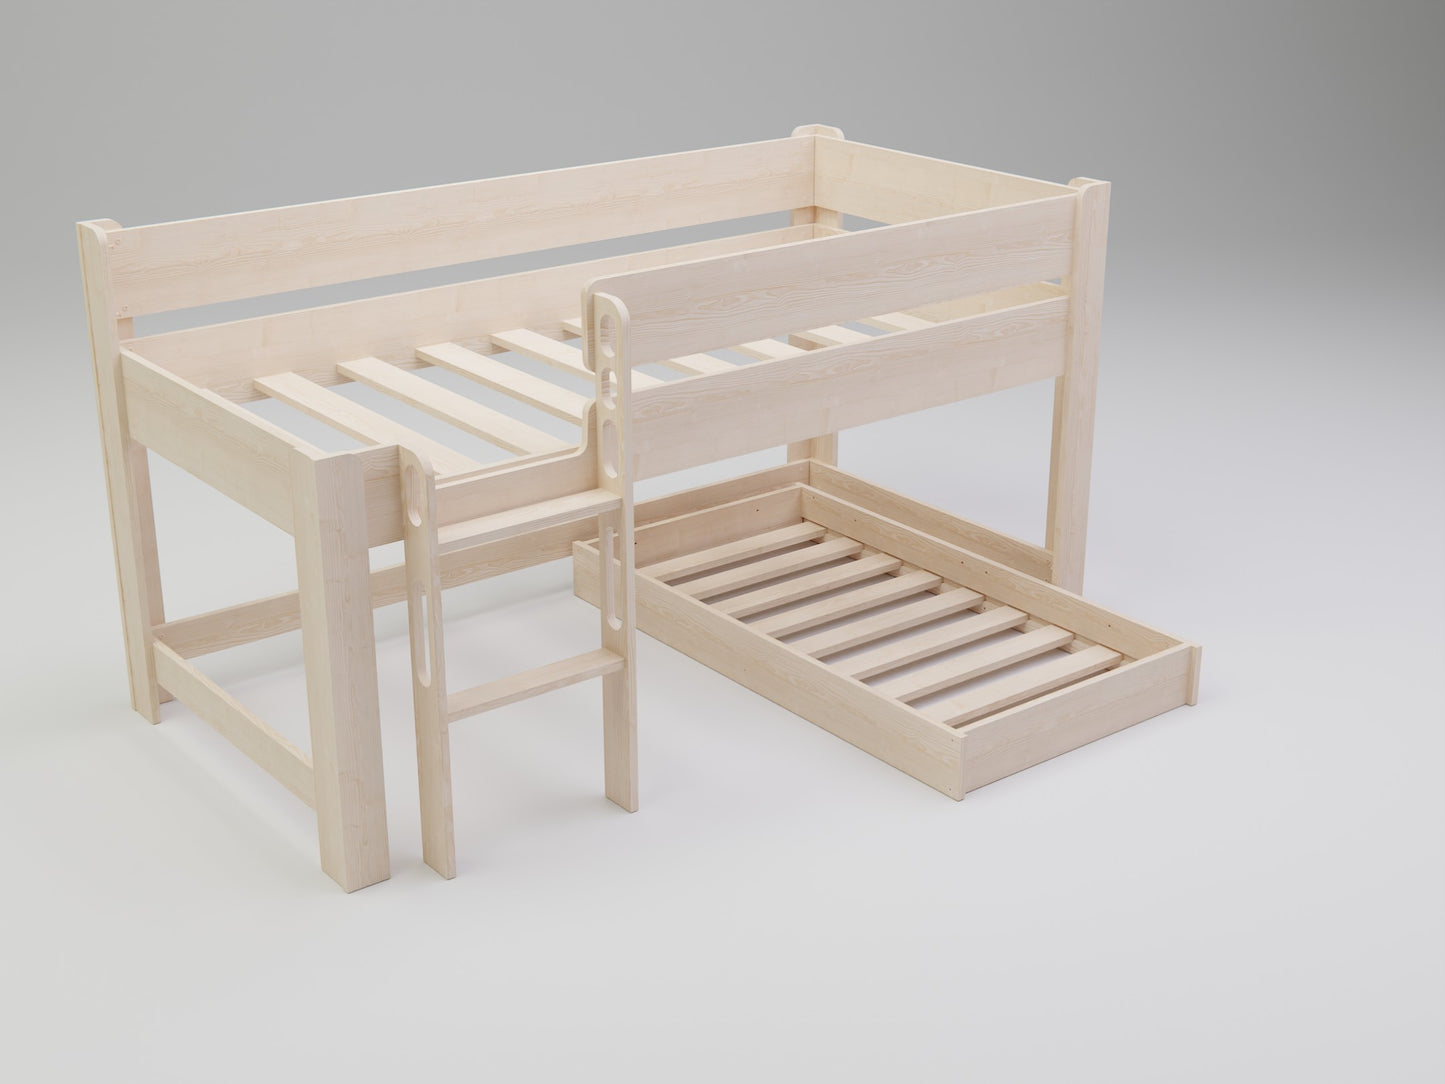 Exclusive L-Shaped bunk beds: Merging style, quality, and unrivaled utility. Get yours at a special rate.